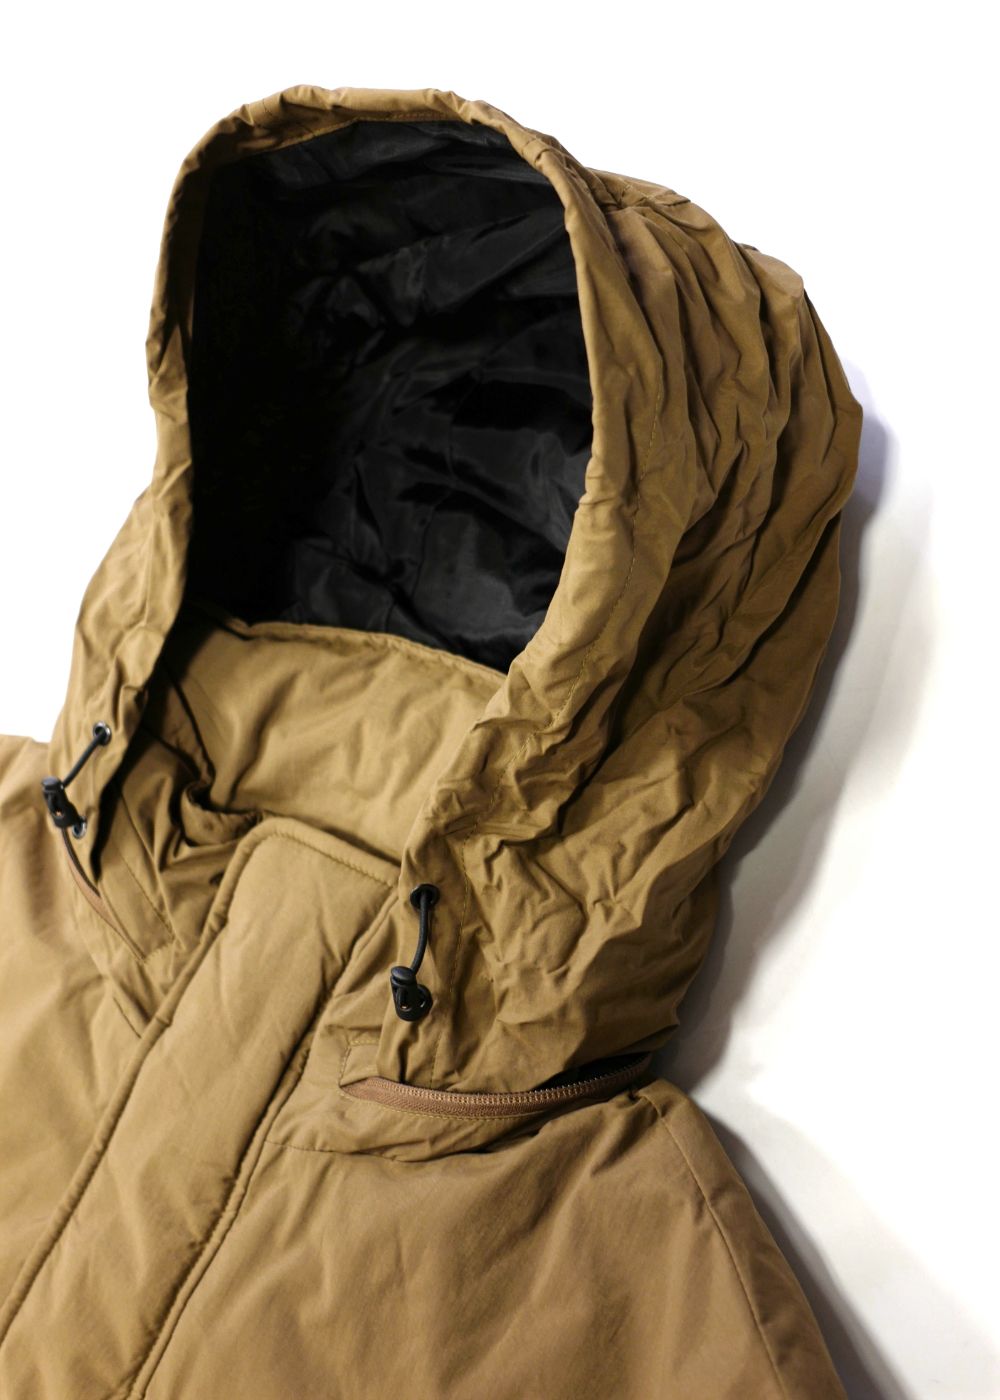 M&M WARM SHELL STAND HOODED JACKET M 茶系 | myglobaltax.com